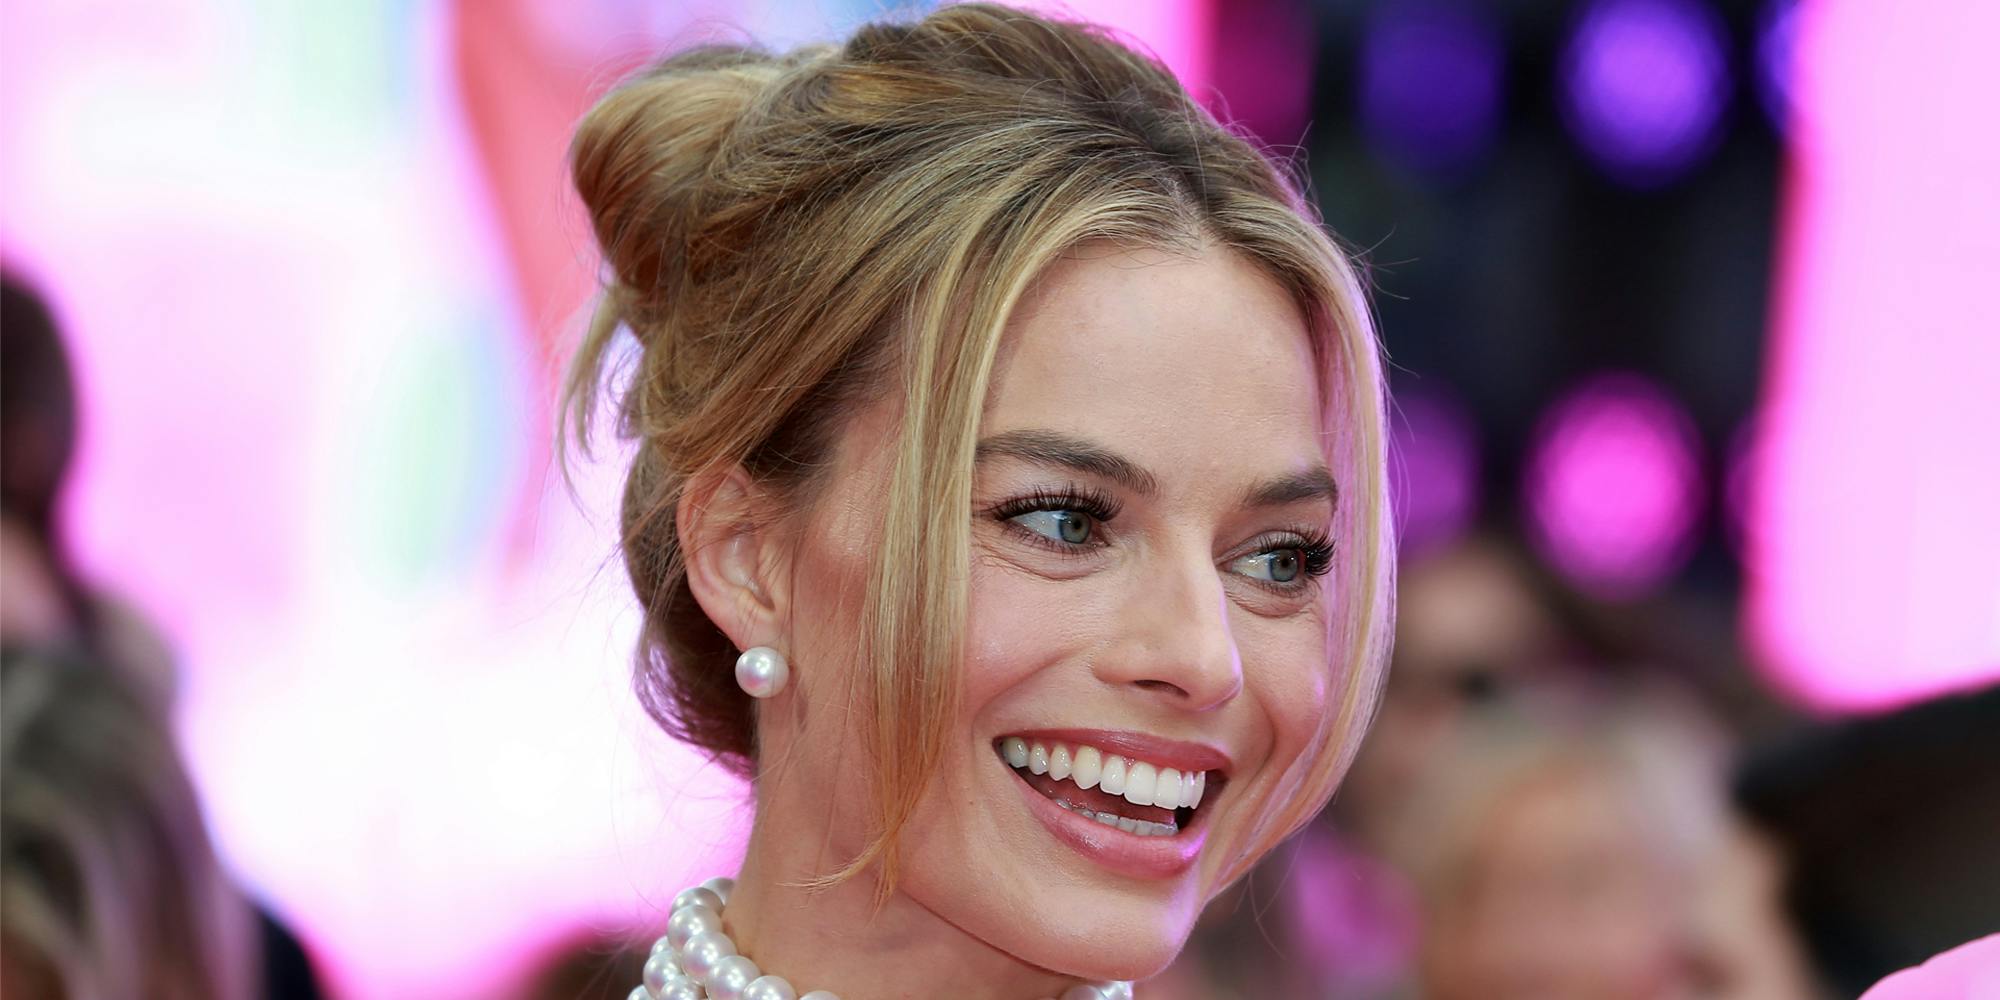 Margot Robbie in front of blurry pink and black background